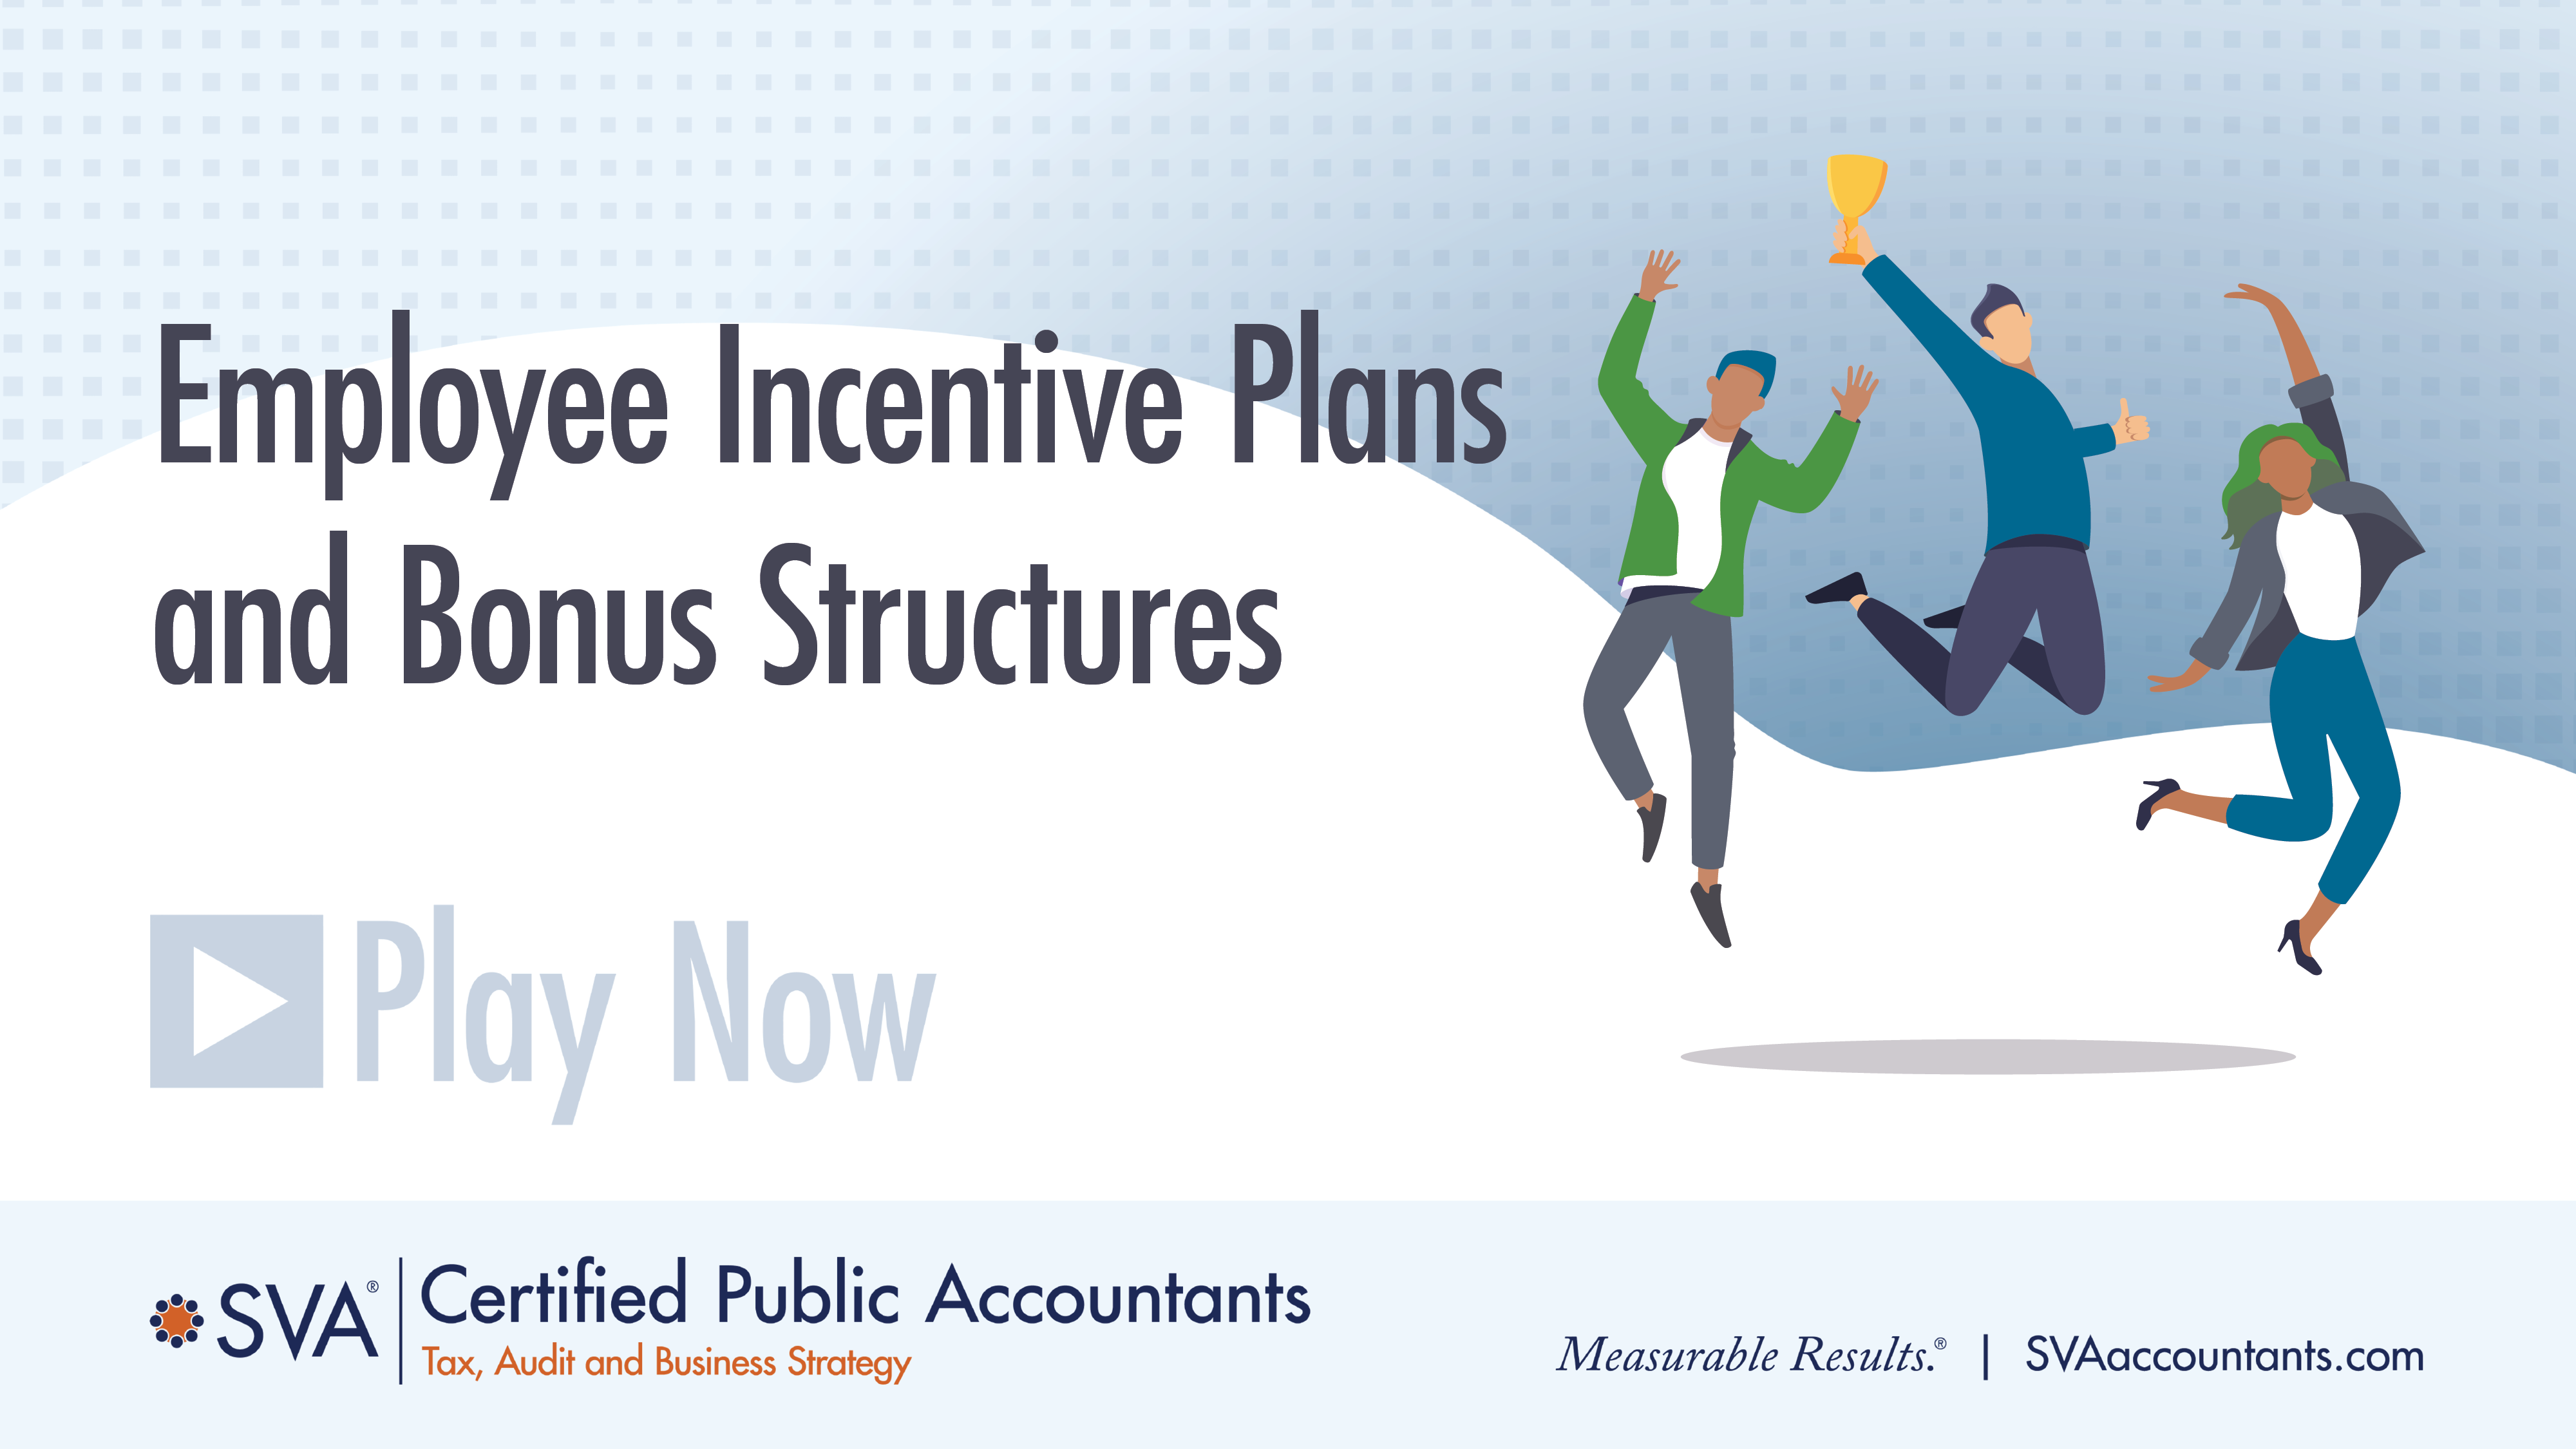 Employee Incentive Plans and Bonus Structures